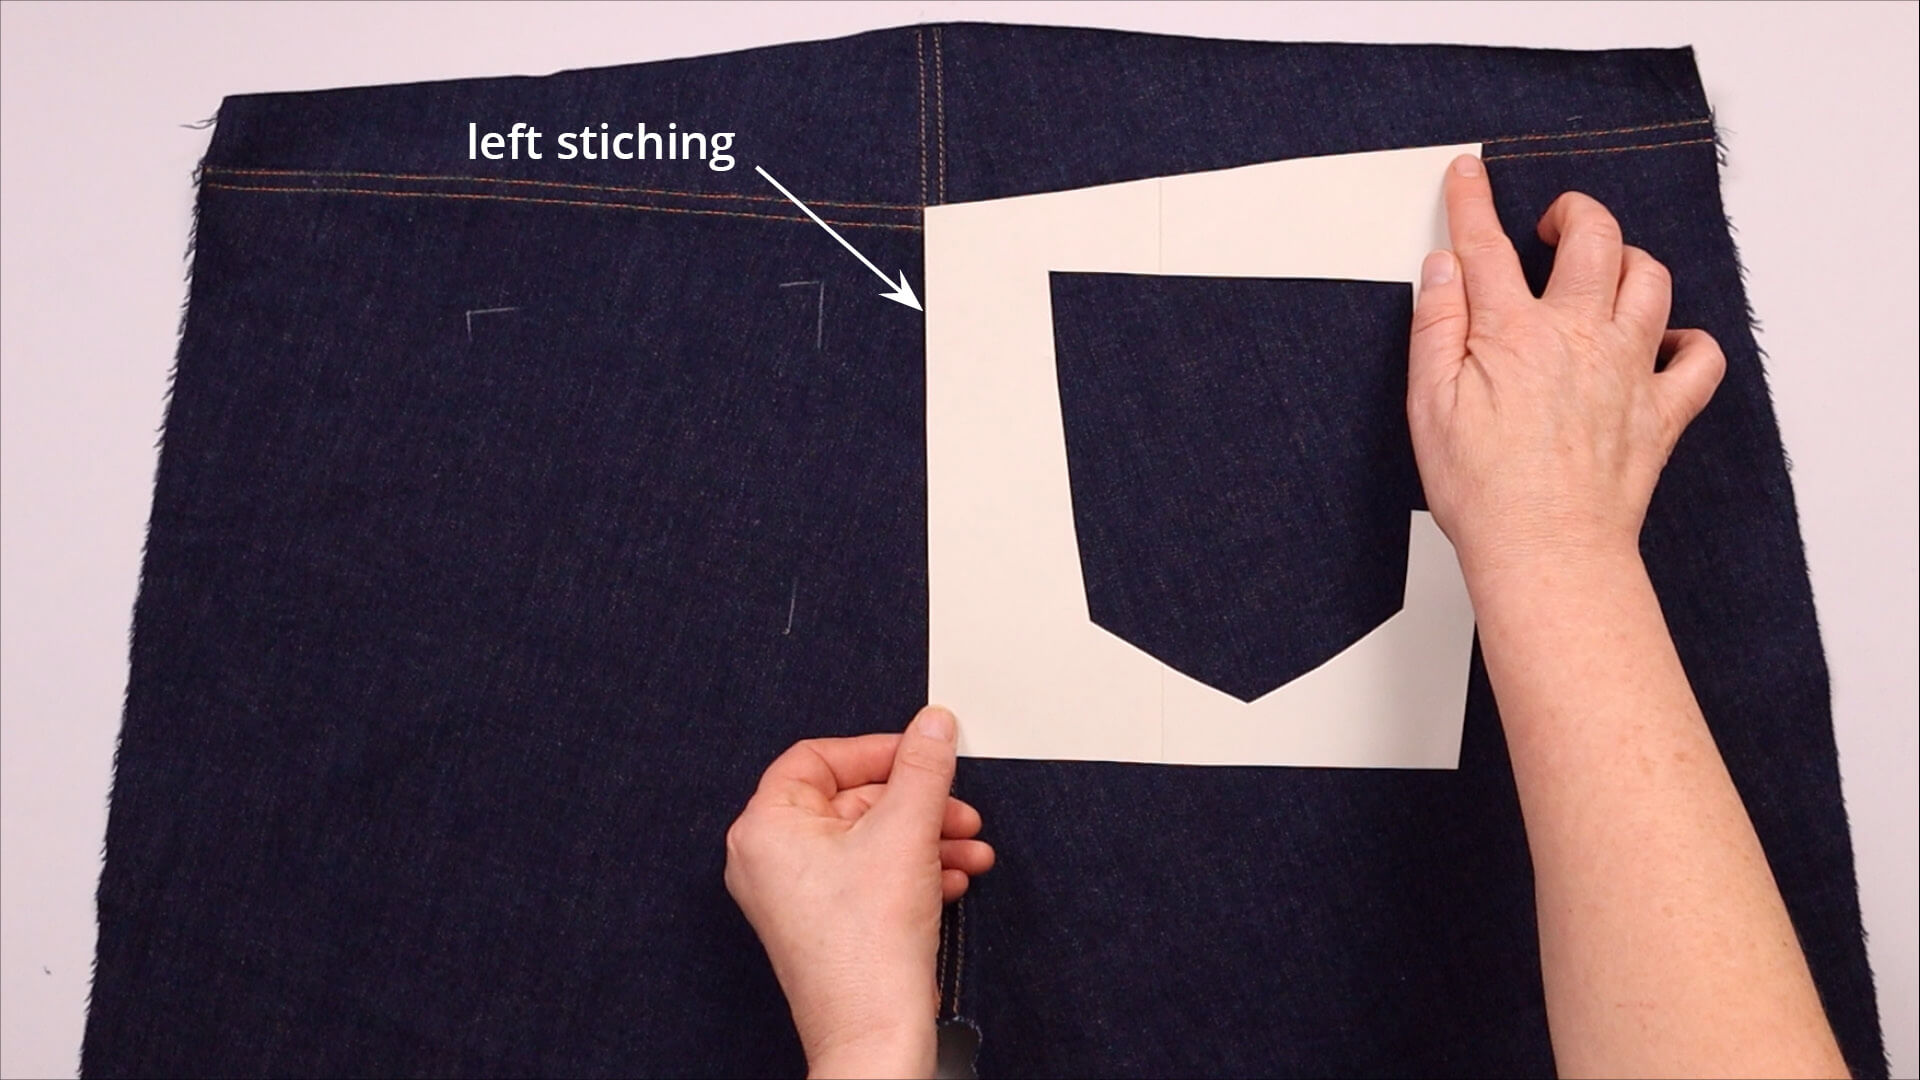 smartPATTERN sewing instructions for patch back pocket of a pair of jeans - place pocket marker template on the right side